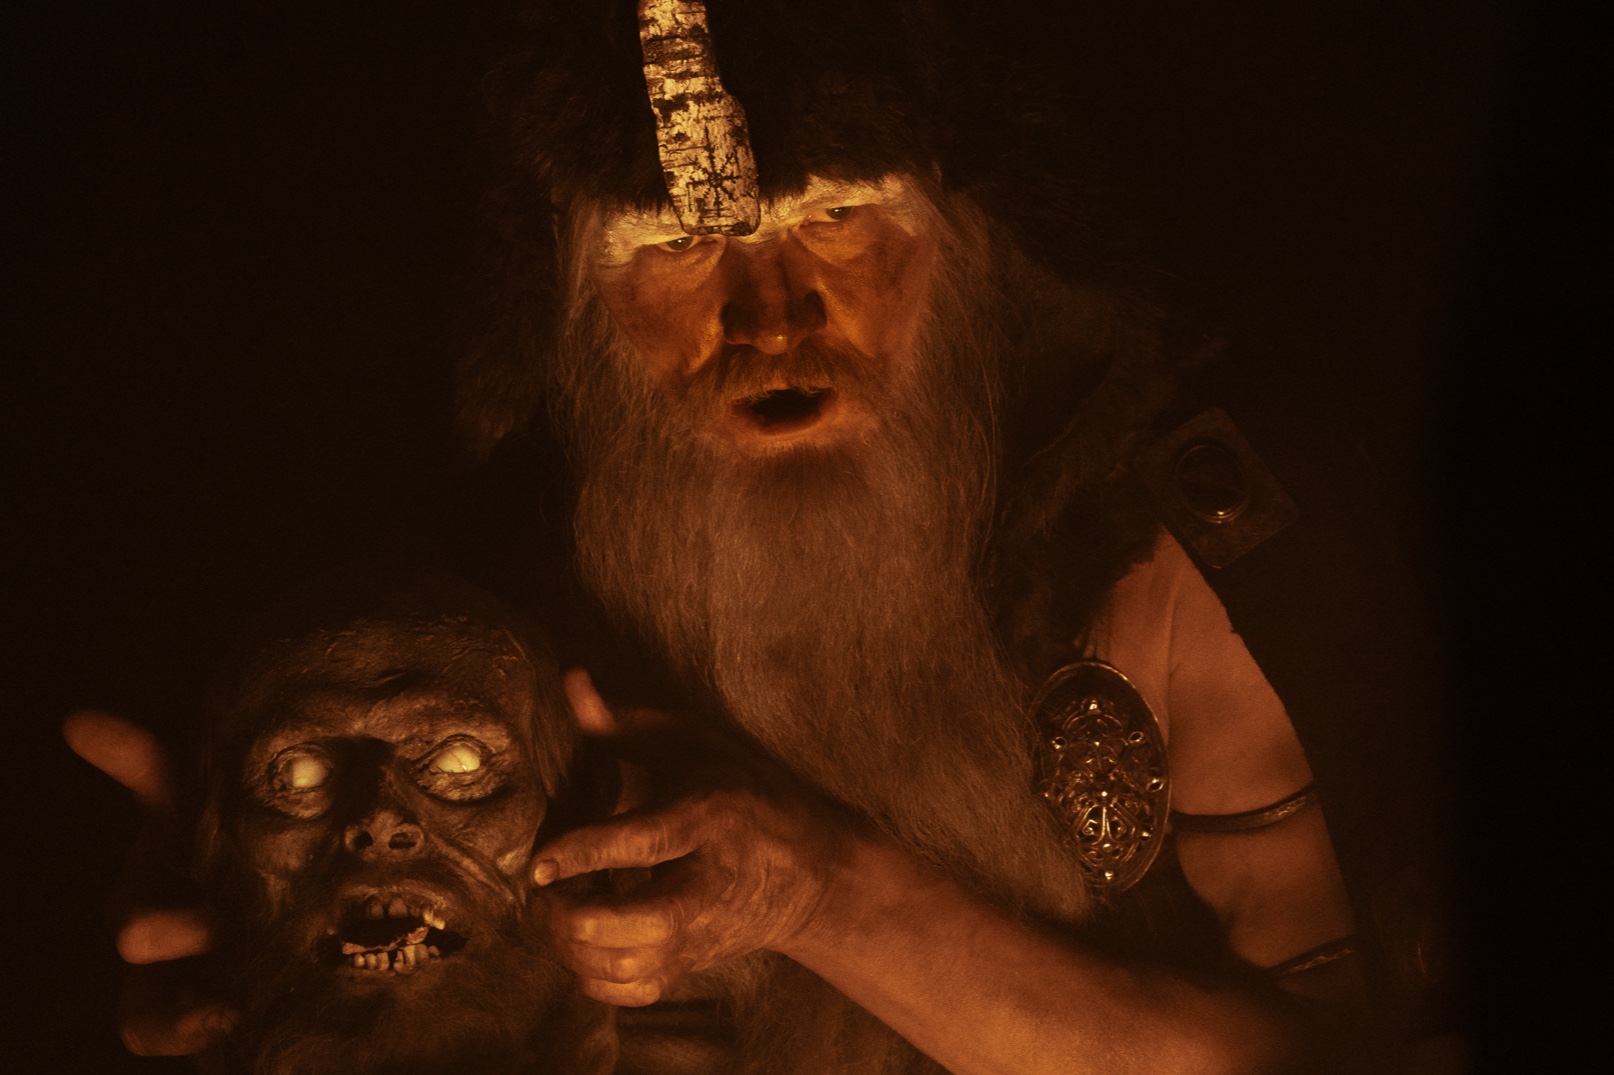 Ingvar Eggert Sigurðsson as He-witch (image courtesy of Focus Features)